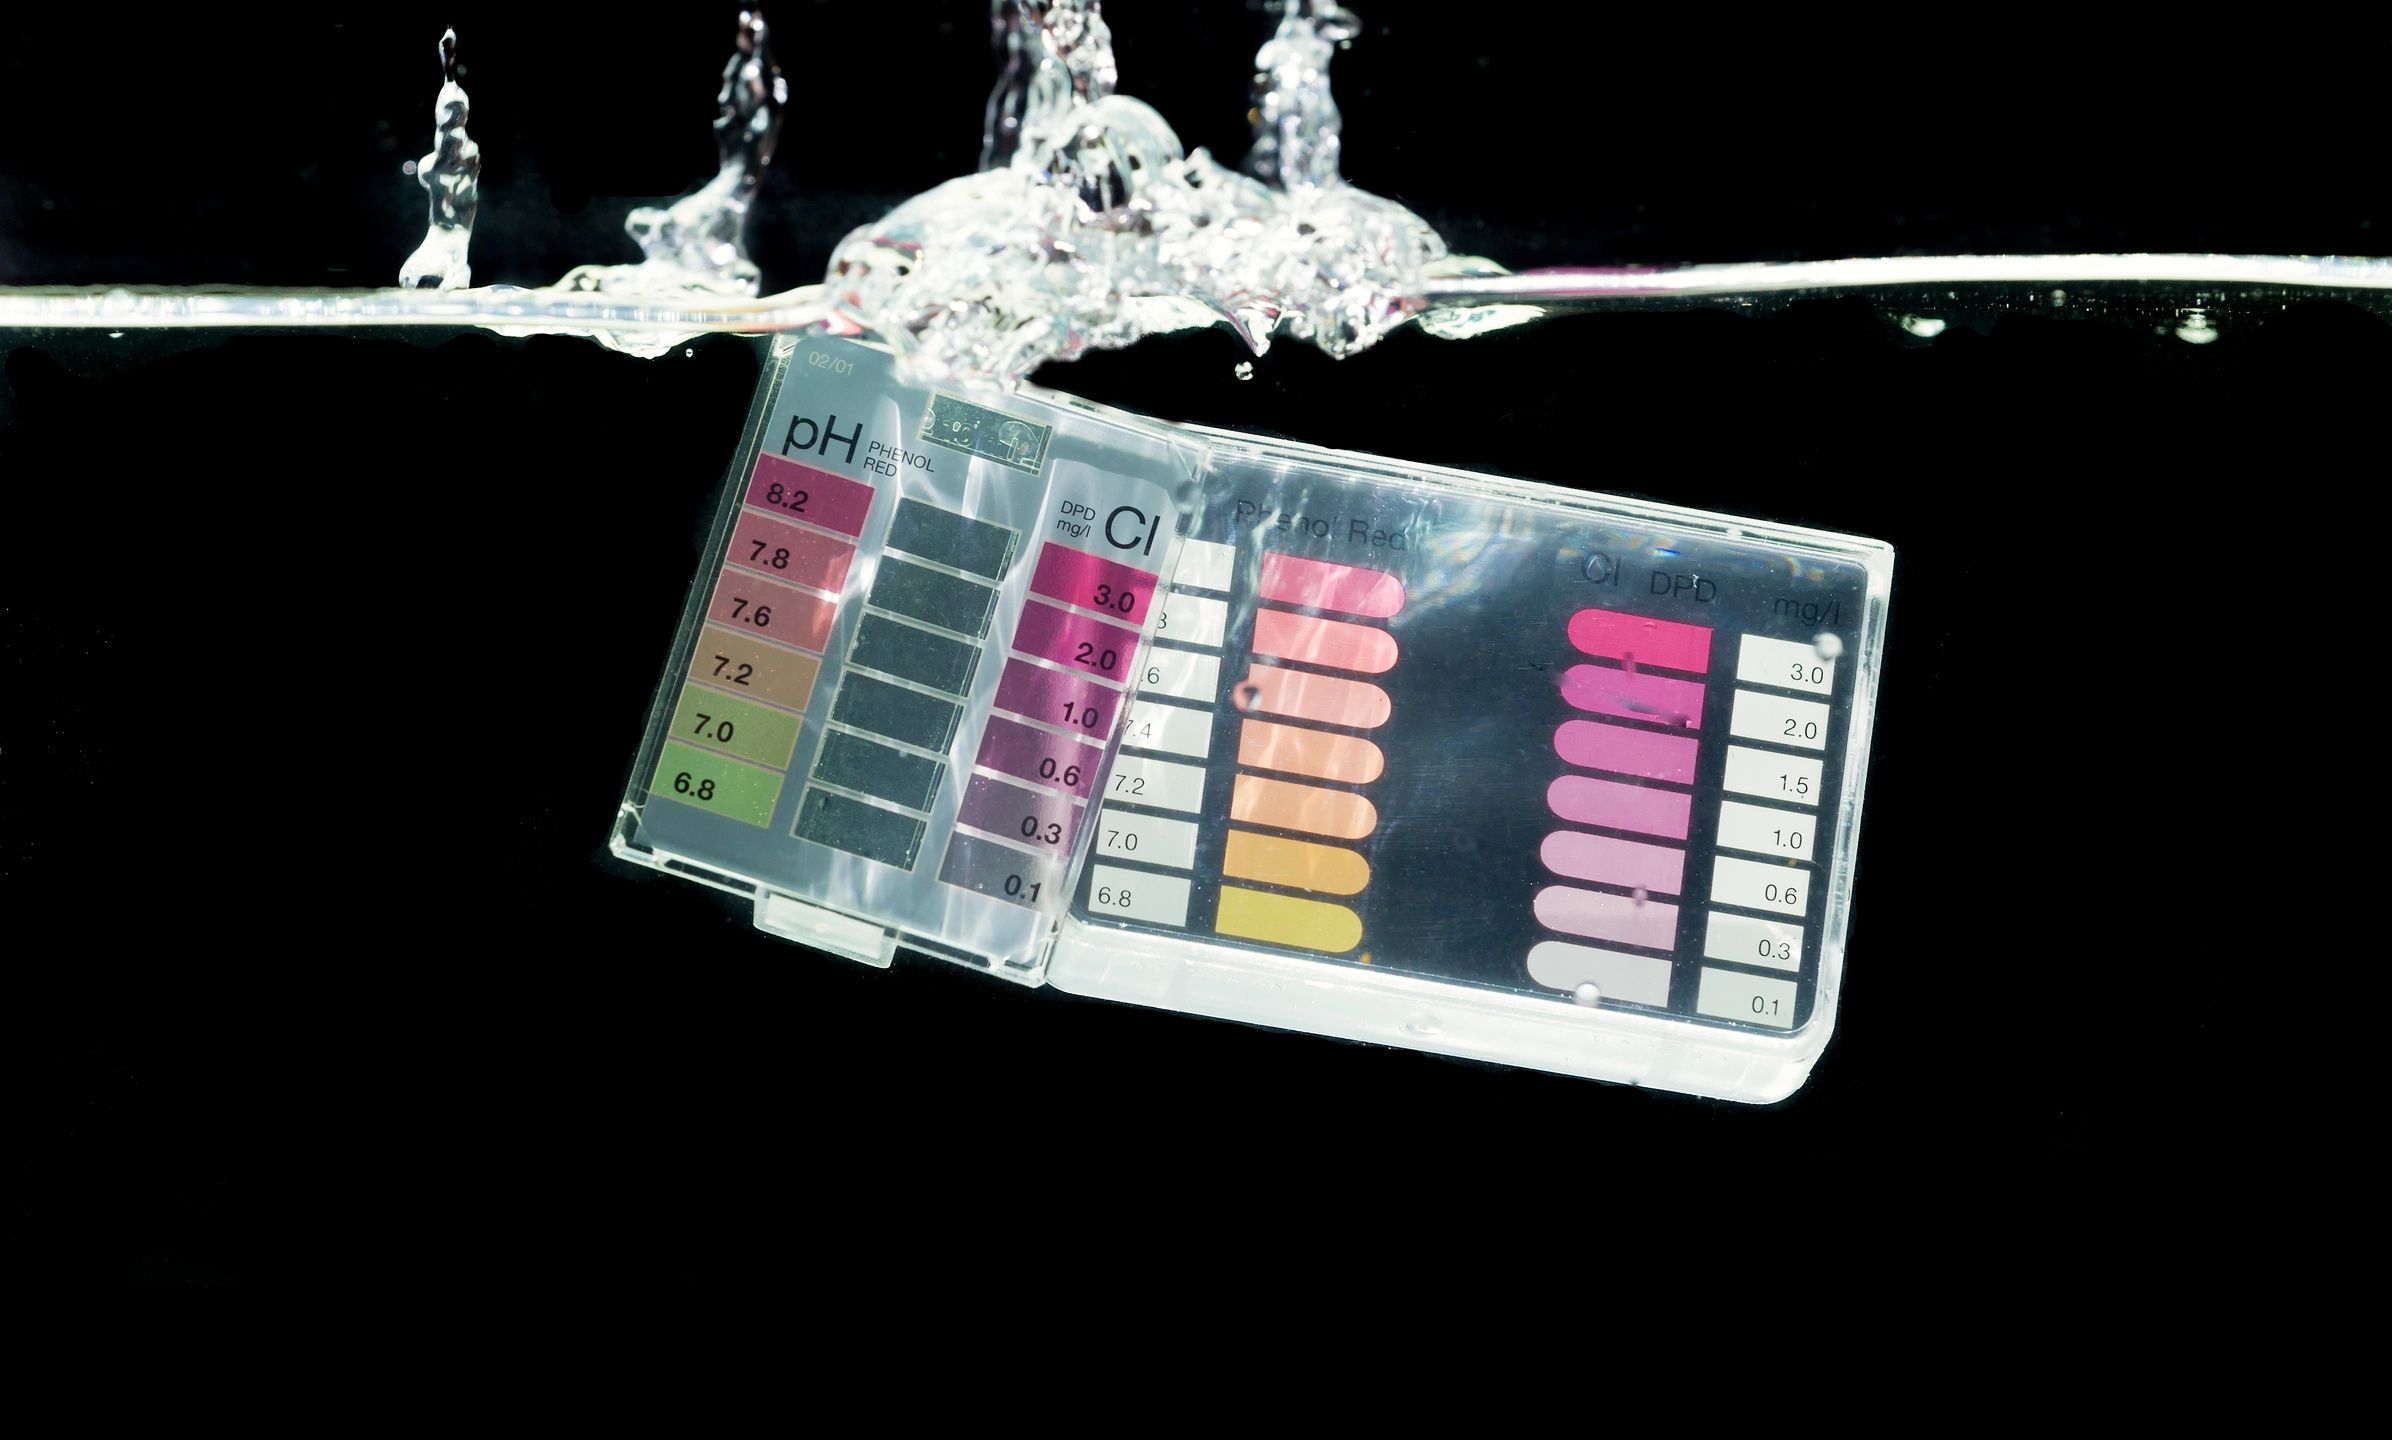 Pool Chemistry is comprised of 5 key elements: PH, Alkalinity, Chlorine, Calcium Hardness & Cyanuric Acid. The most common way to test for these chemical levels requires a Taylor or Lamotte test kit similar to the one shown above. This particular unit utilizes "Drop Testing." This is one of the simplest method to test your pool chemistry - and we can show you how it's done!